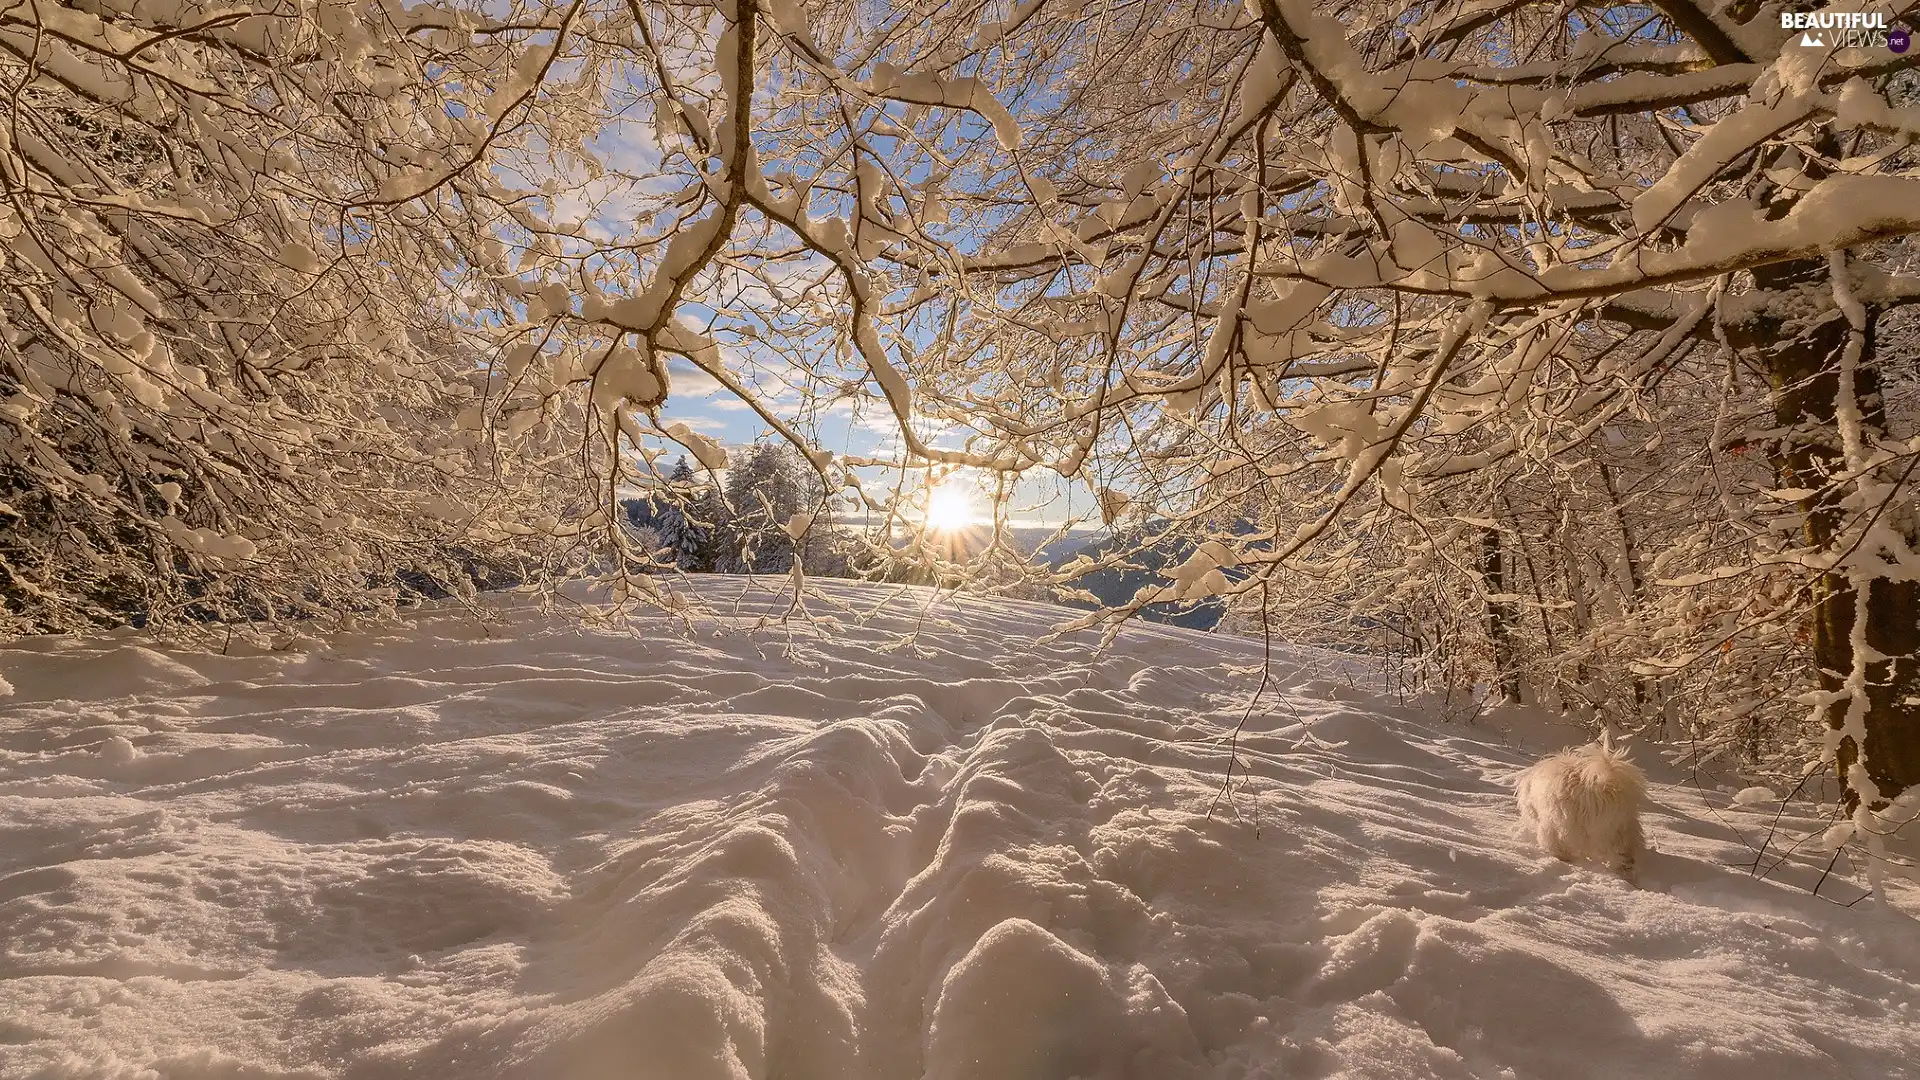 rays of the Sun, trees, dog, viewes, branch pics, snow, winter, Snowy